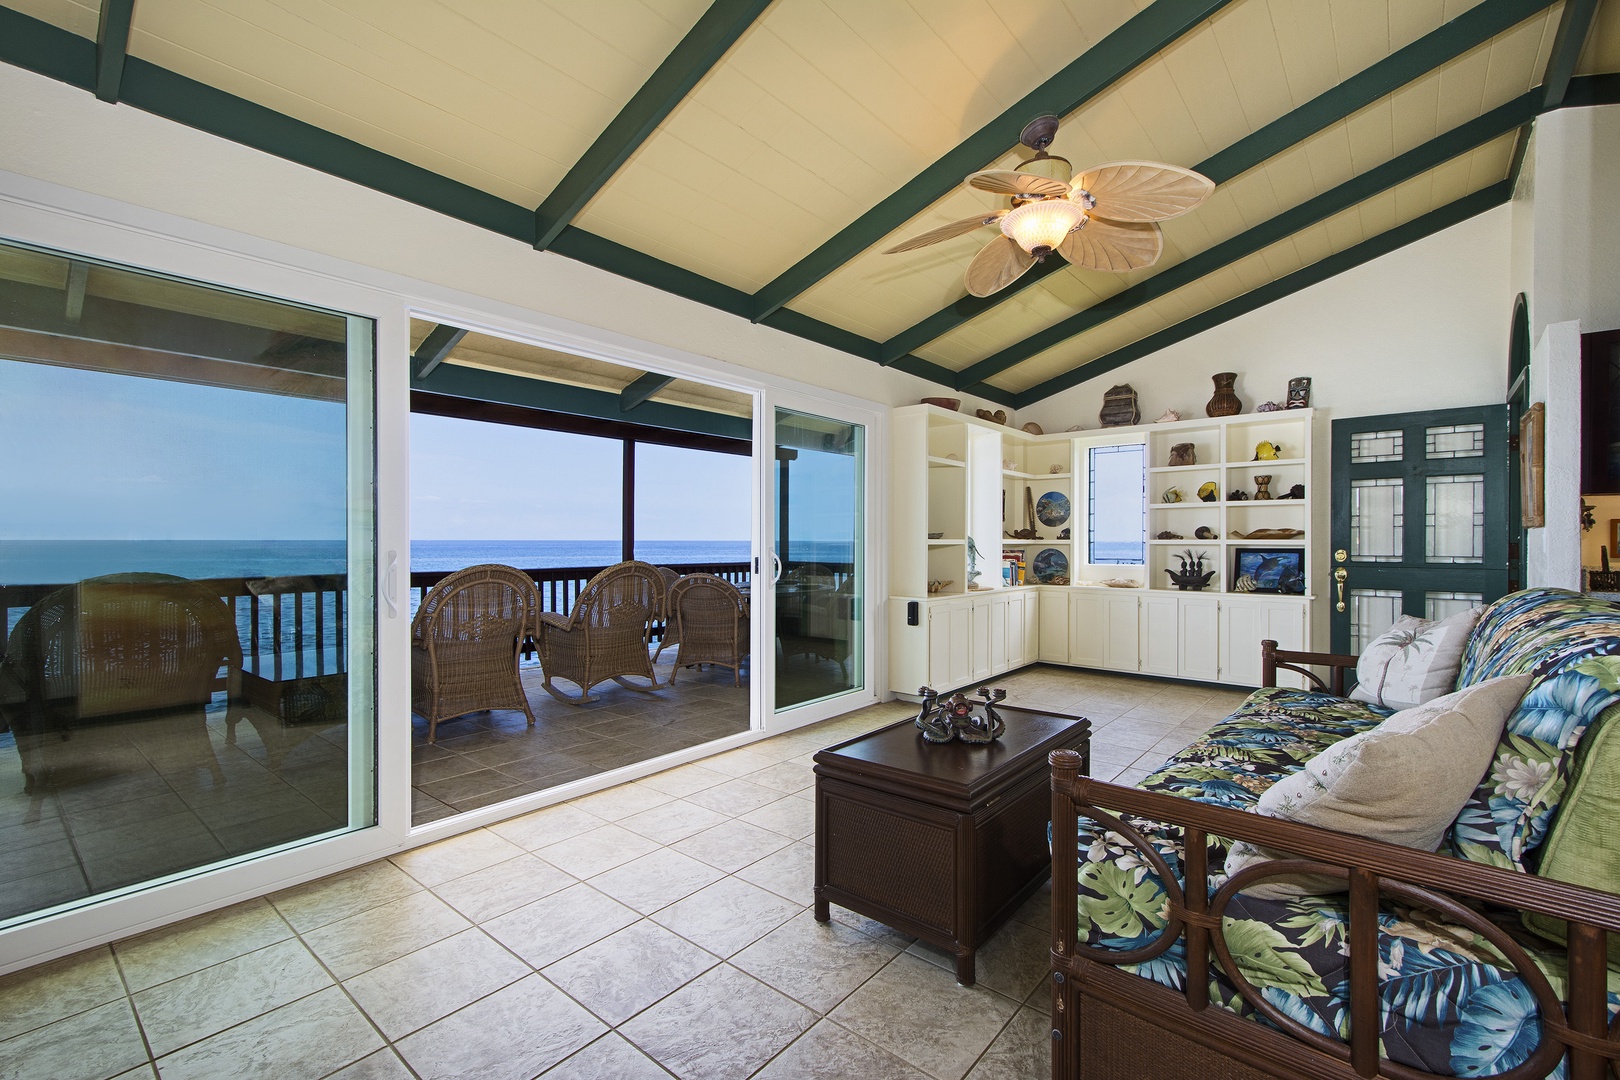 Kailua Kona Vacation Rentals, The Cottage - Large sliding doors that allow the beautiful breezes to blow through the entire house!